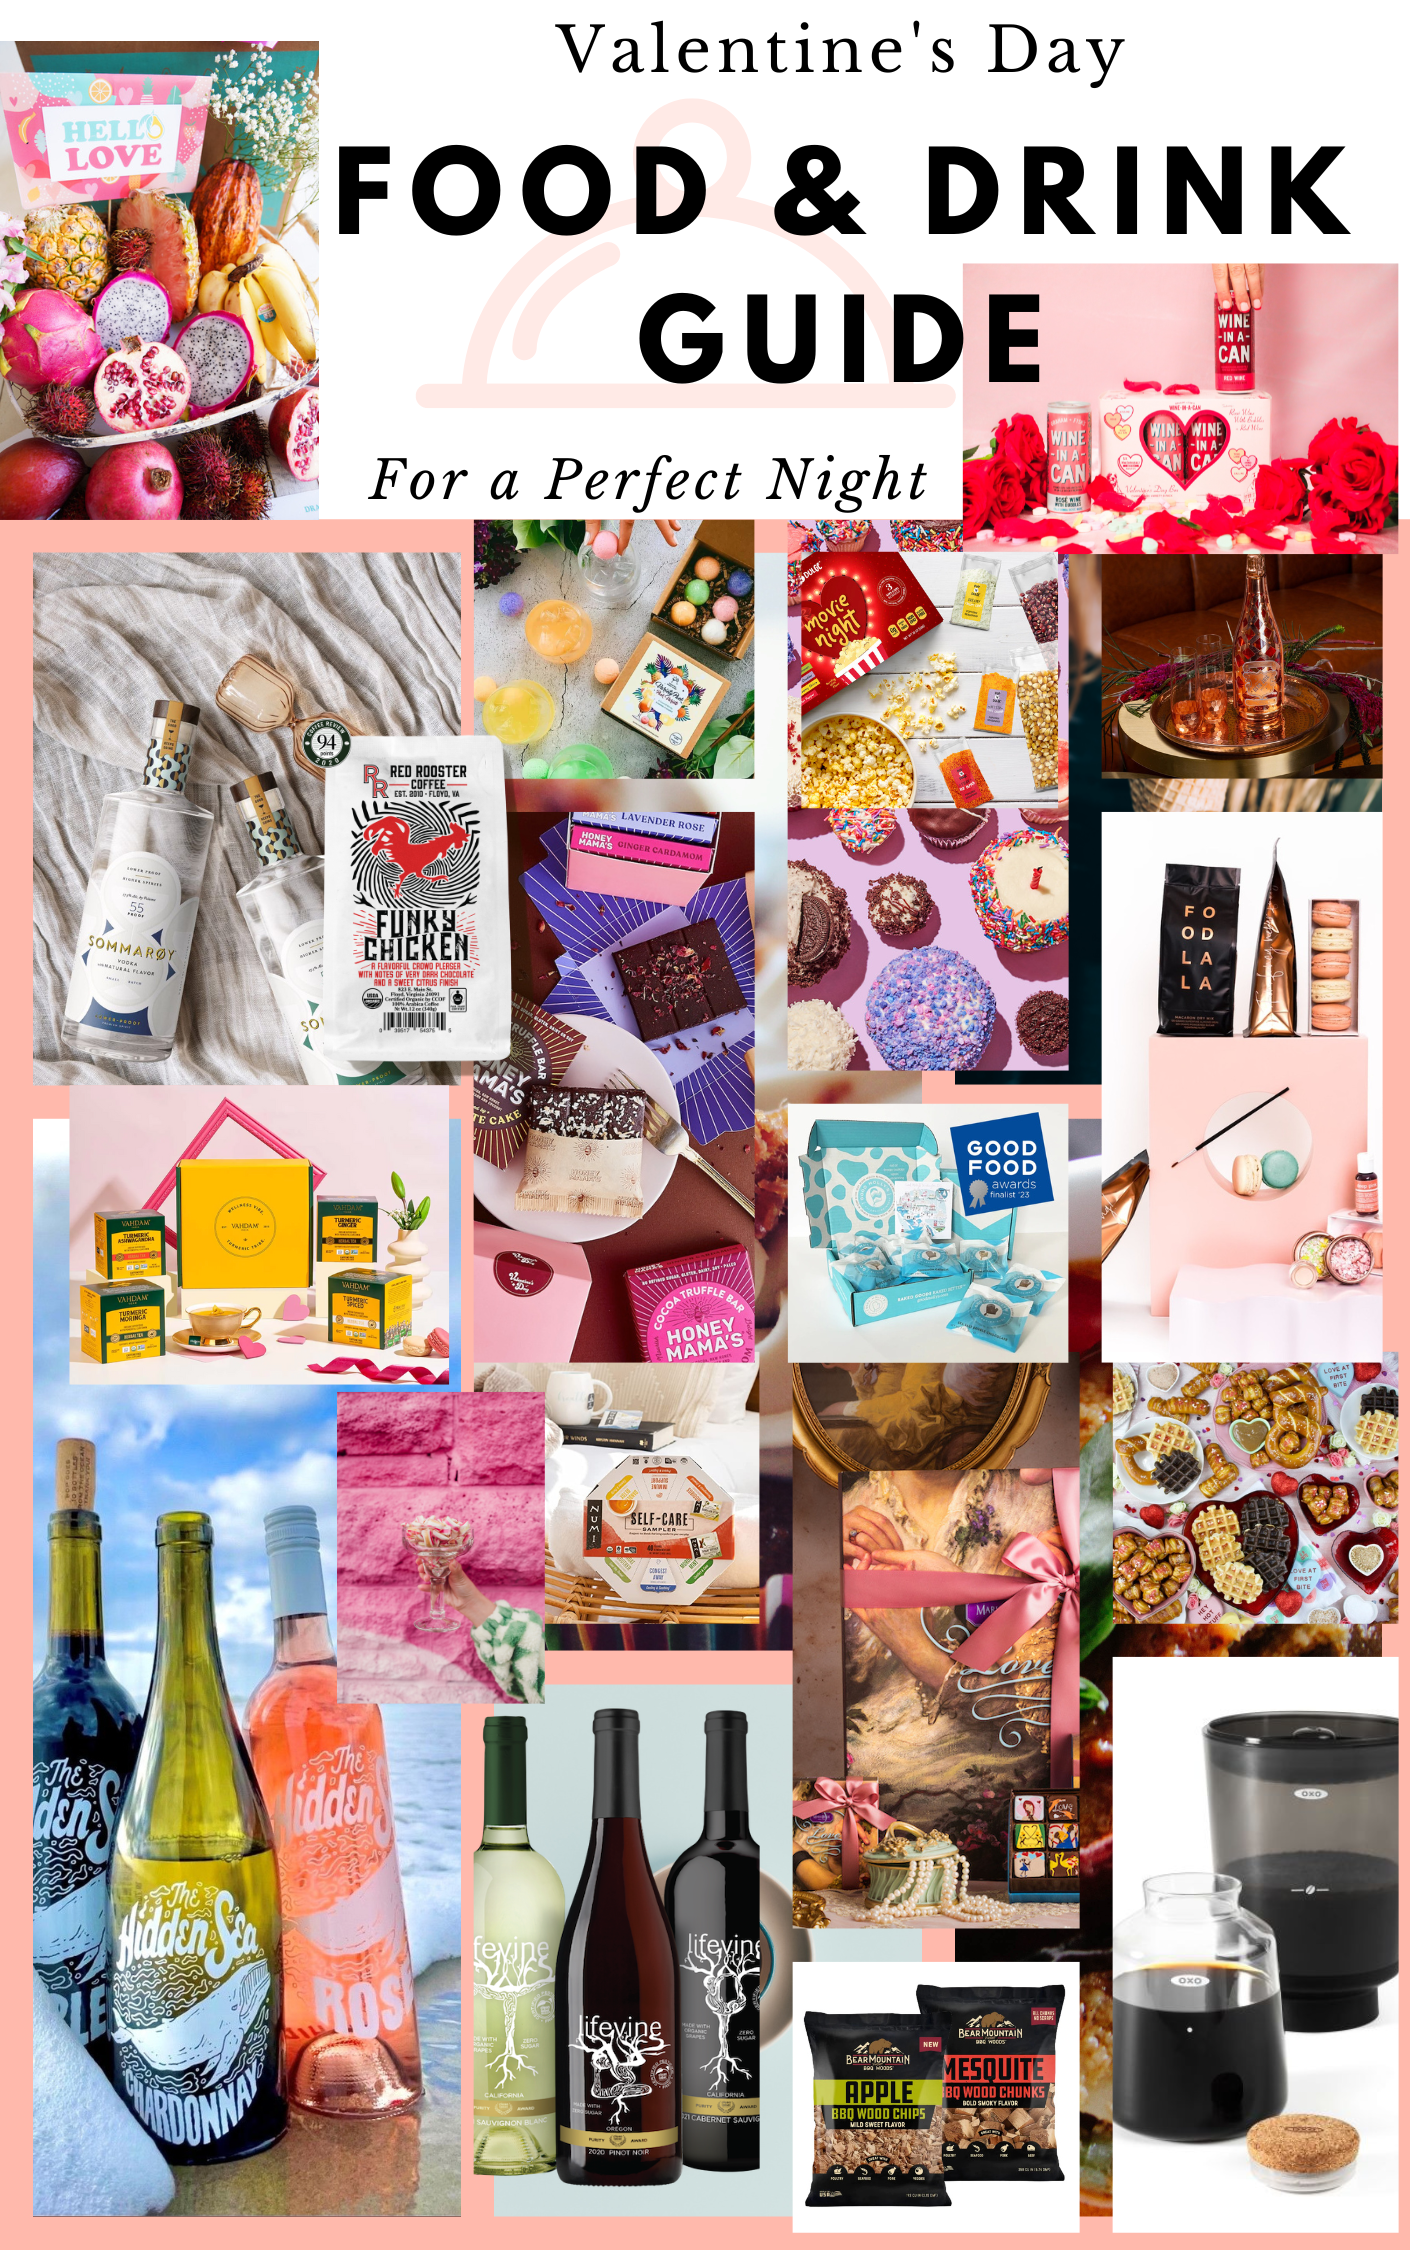 Food and Drink Guide to Create the Perfect Night this Valentine’s Day